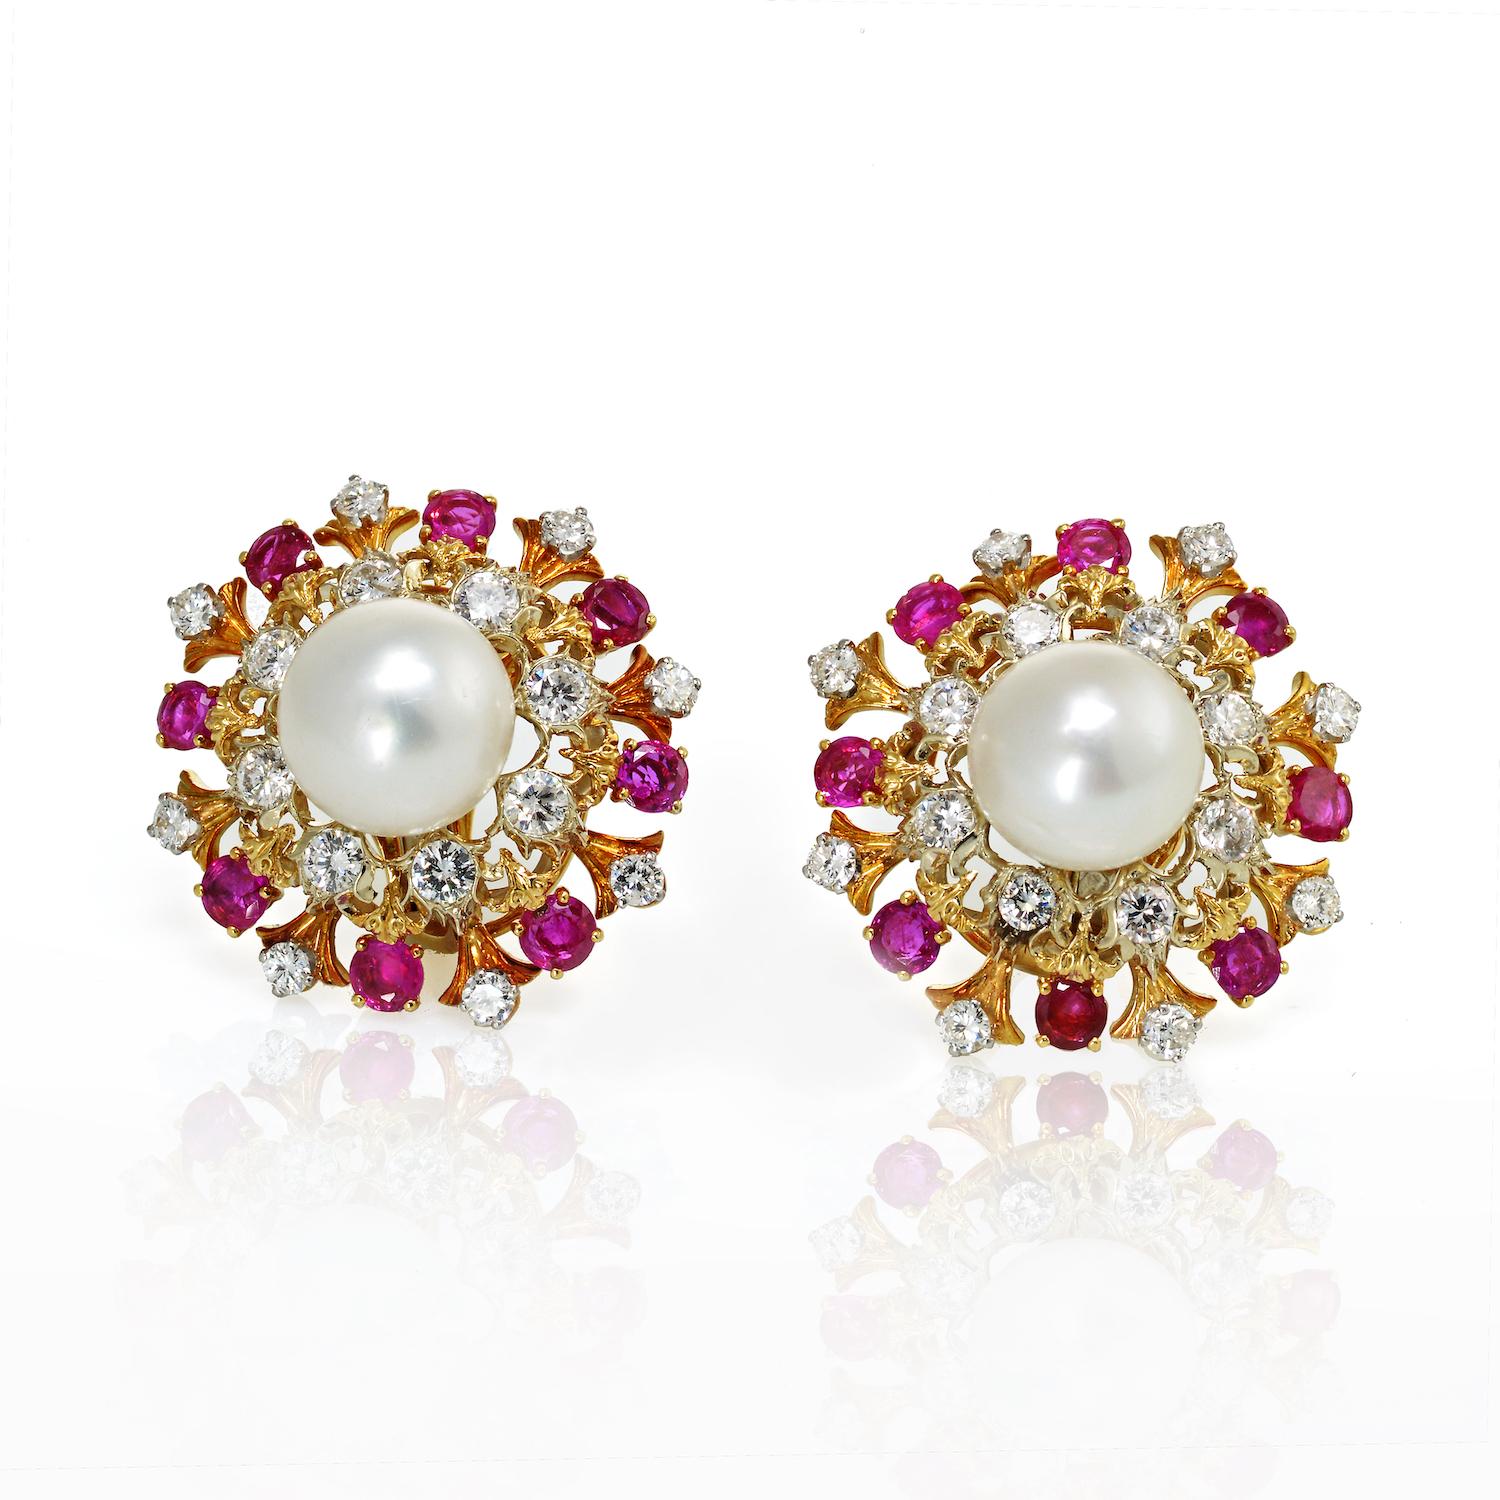 Pair of Two-Color Gold, South Sea Cultured Pearl, Diamond and Ruby Earclips, David Webb
18 kt., centering 2 pearls approximately 13.4 and 13.1 mm., encircled by two rows of 32 round diamonds approximately 4.00 cts., and 16 round rubies approximately